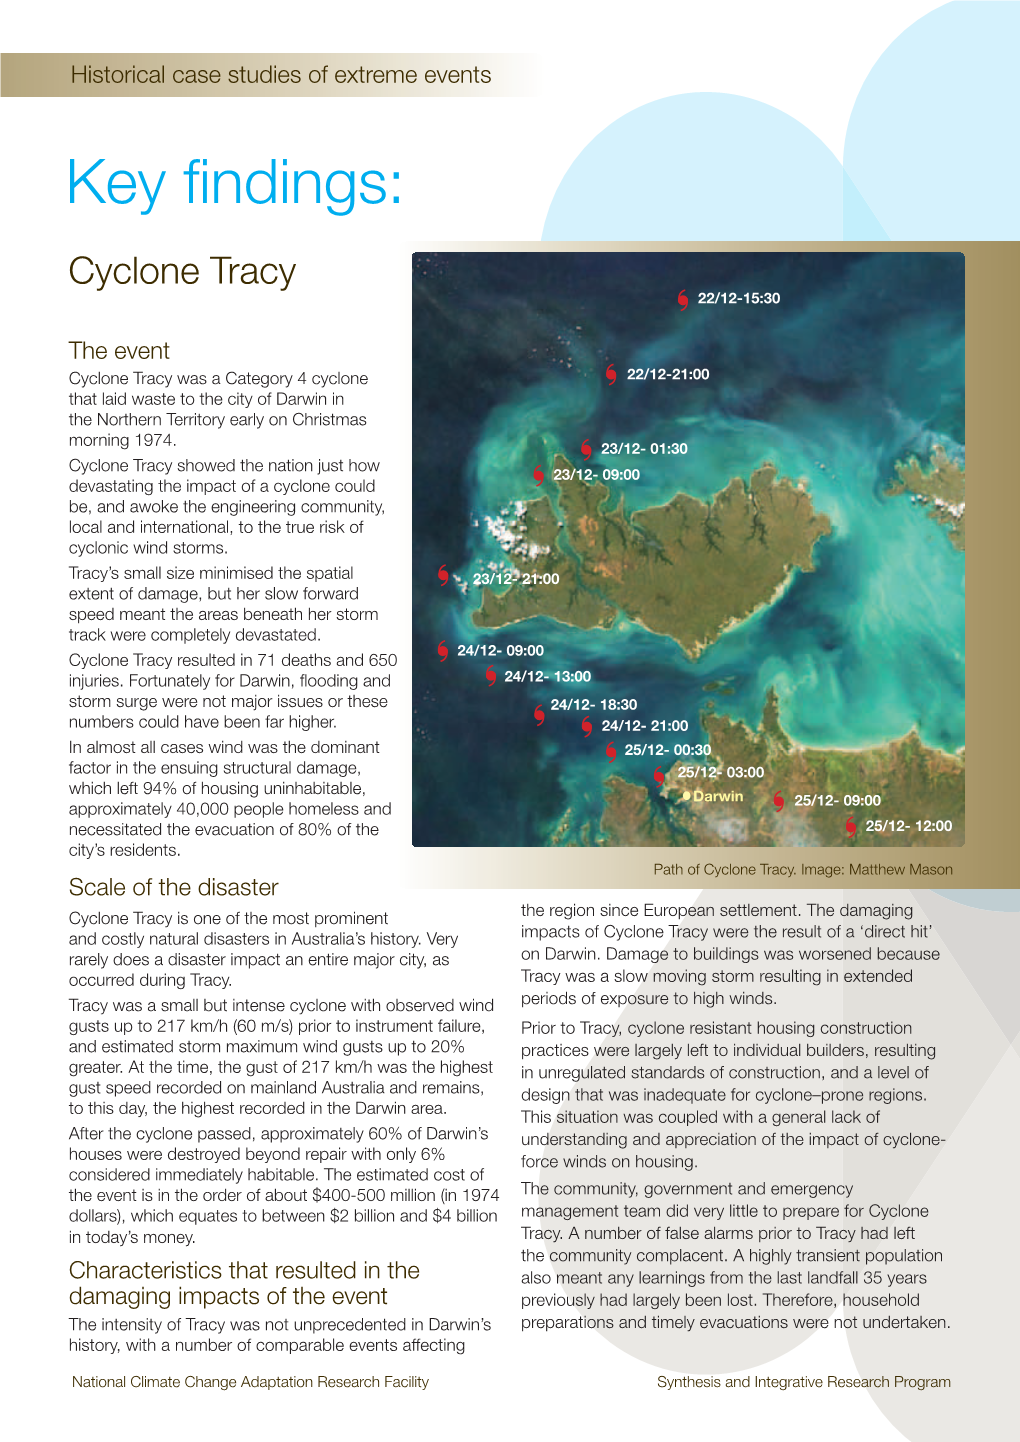 Cyclone Tracey-Key Findings.Pdf